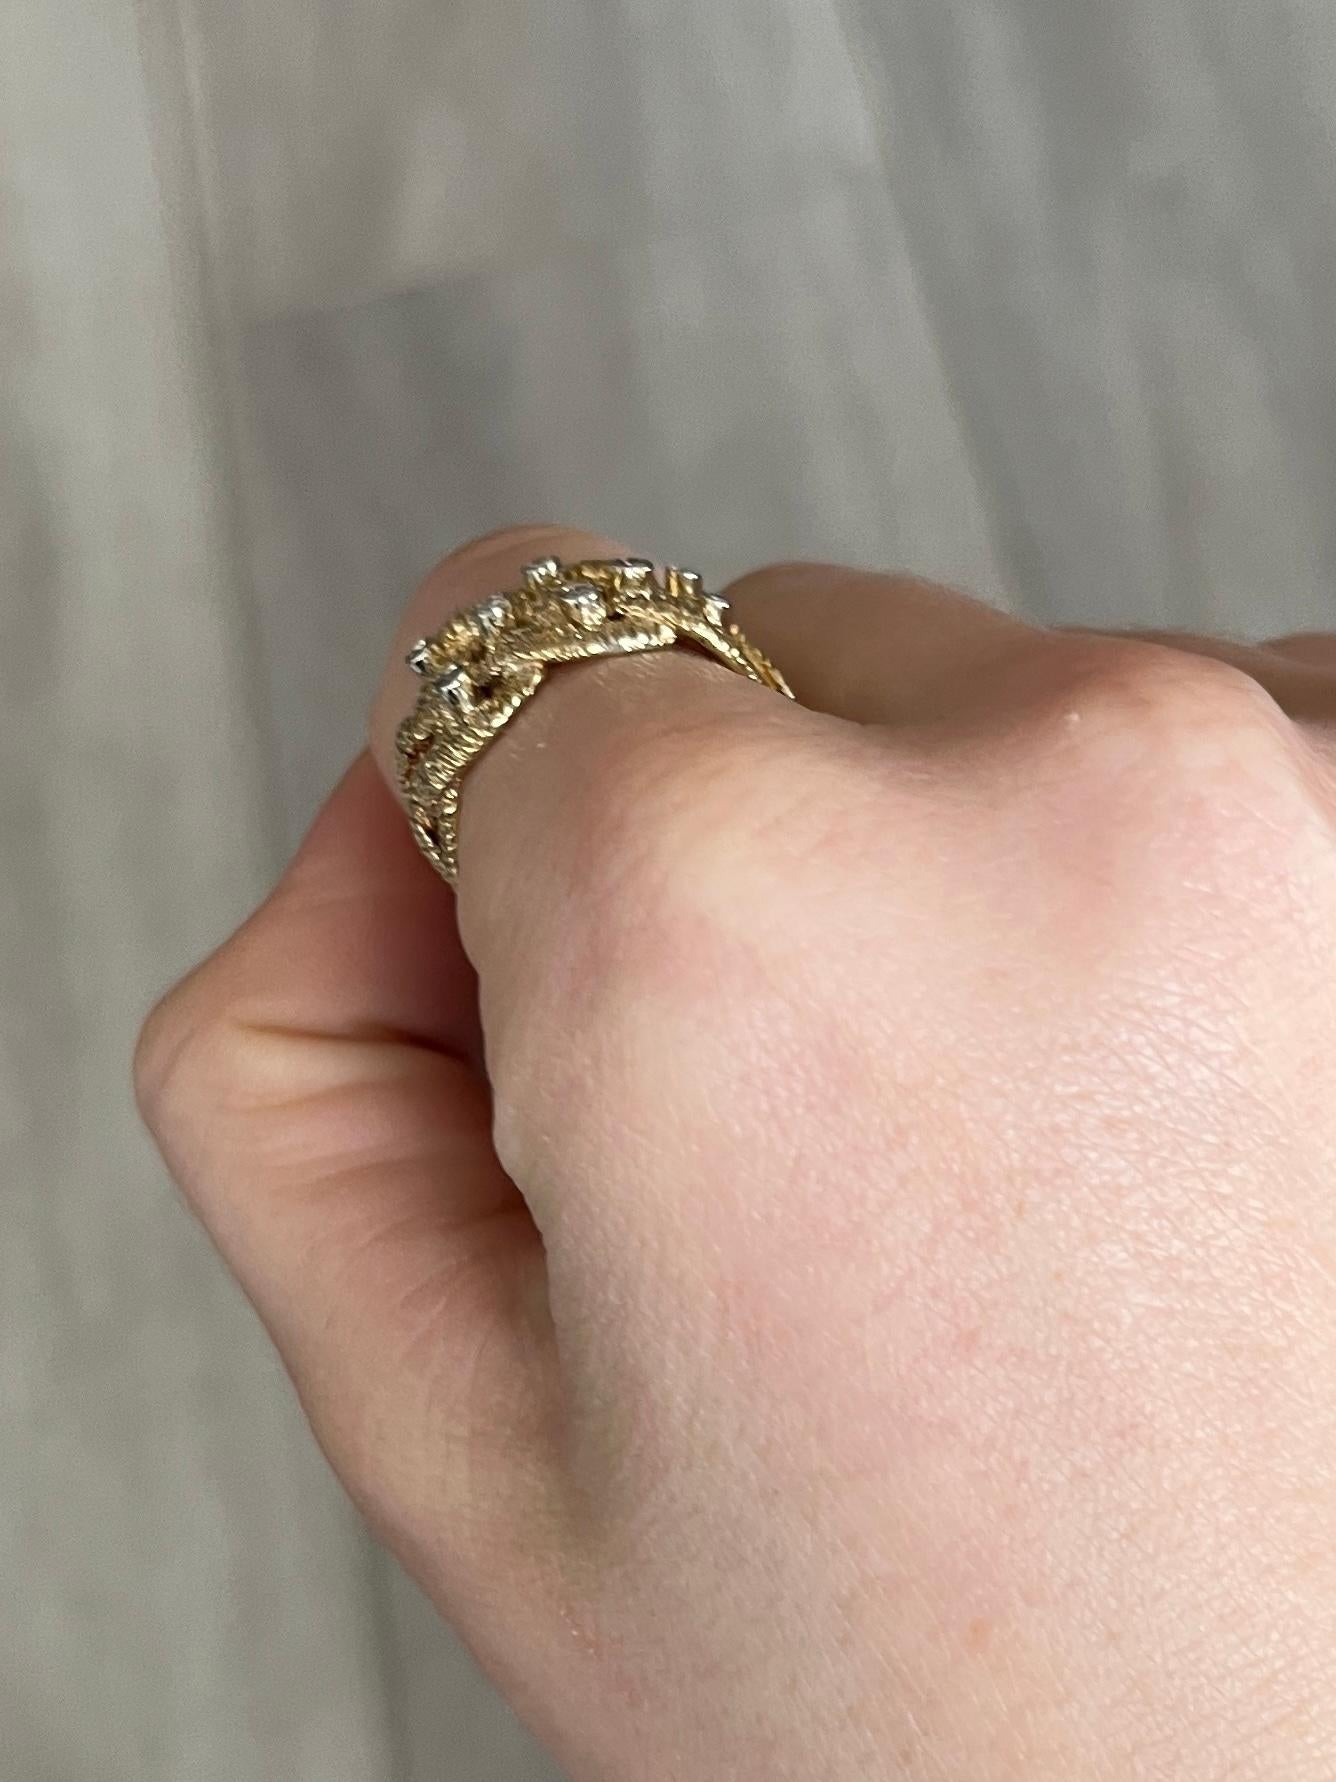 This Crop & Farr ring holds 8 diamonds which total 32pts. The chunky 18carat gold is textured and woven into a beautiful wide band. Hallmarked London 1973. 

Ring Size: P or 7 3/4
Band Width: 13mm 

Weight: 8.4g